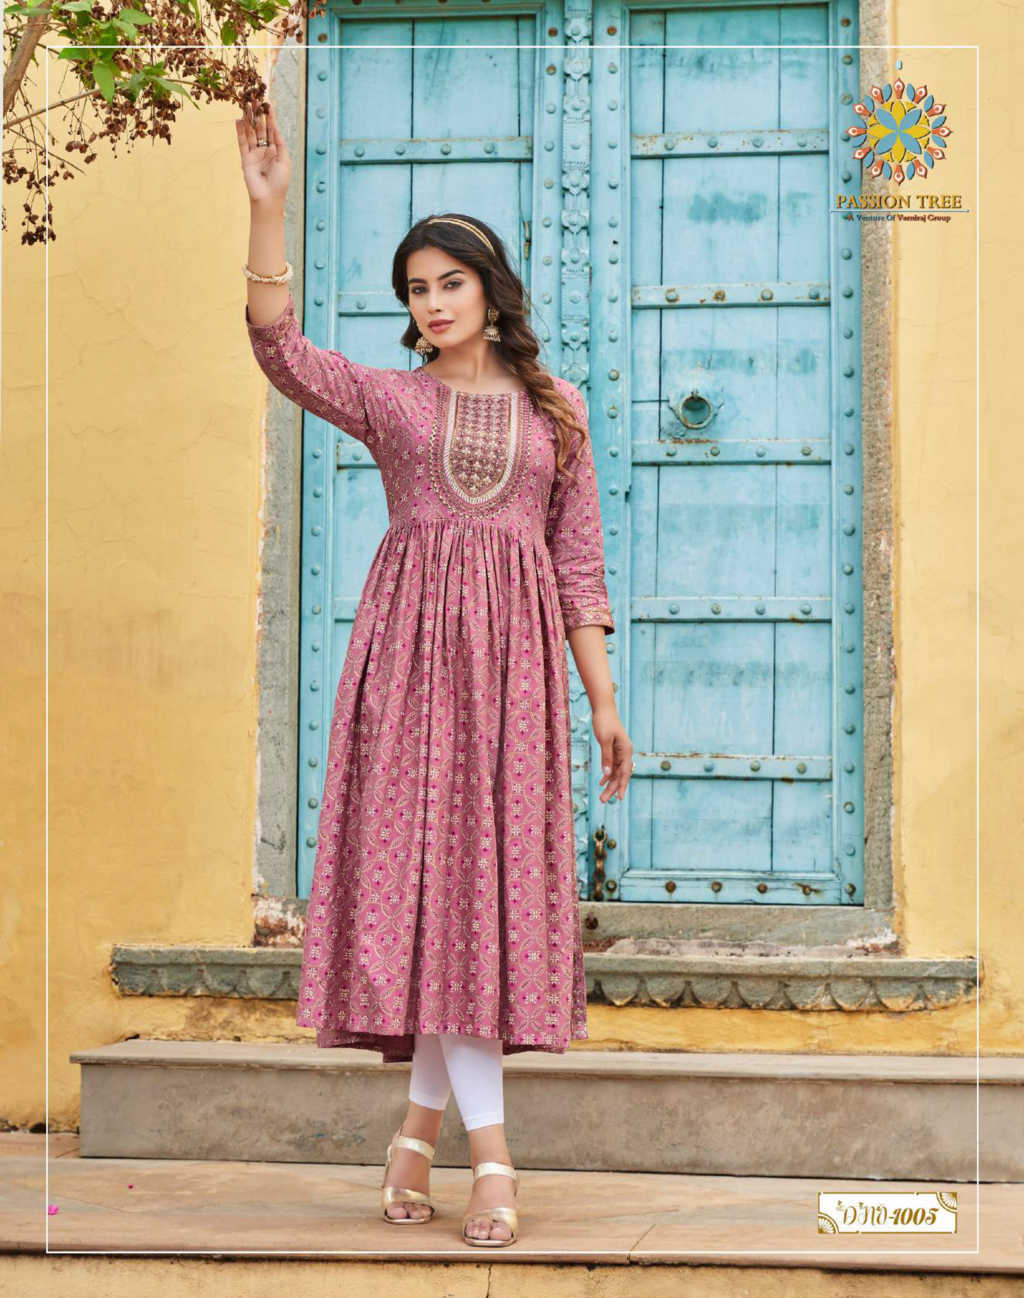 Girls Rayon Frock Kurti Feature  Comfortable Skin Friendly Pattern   Printed at Rs 131  500 in Ahmedabad